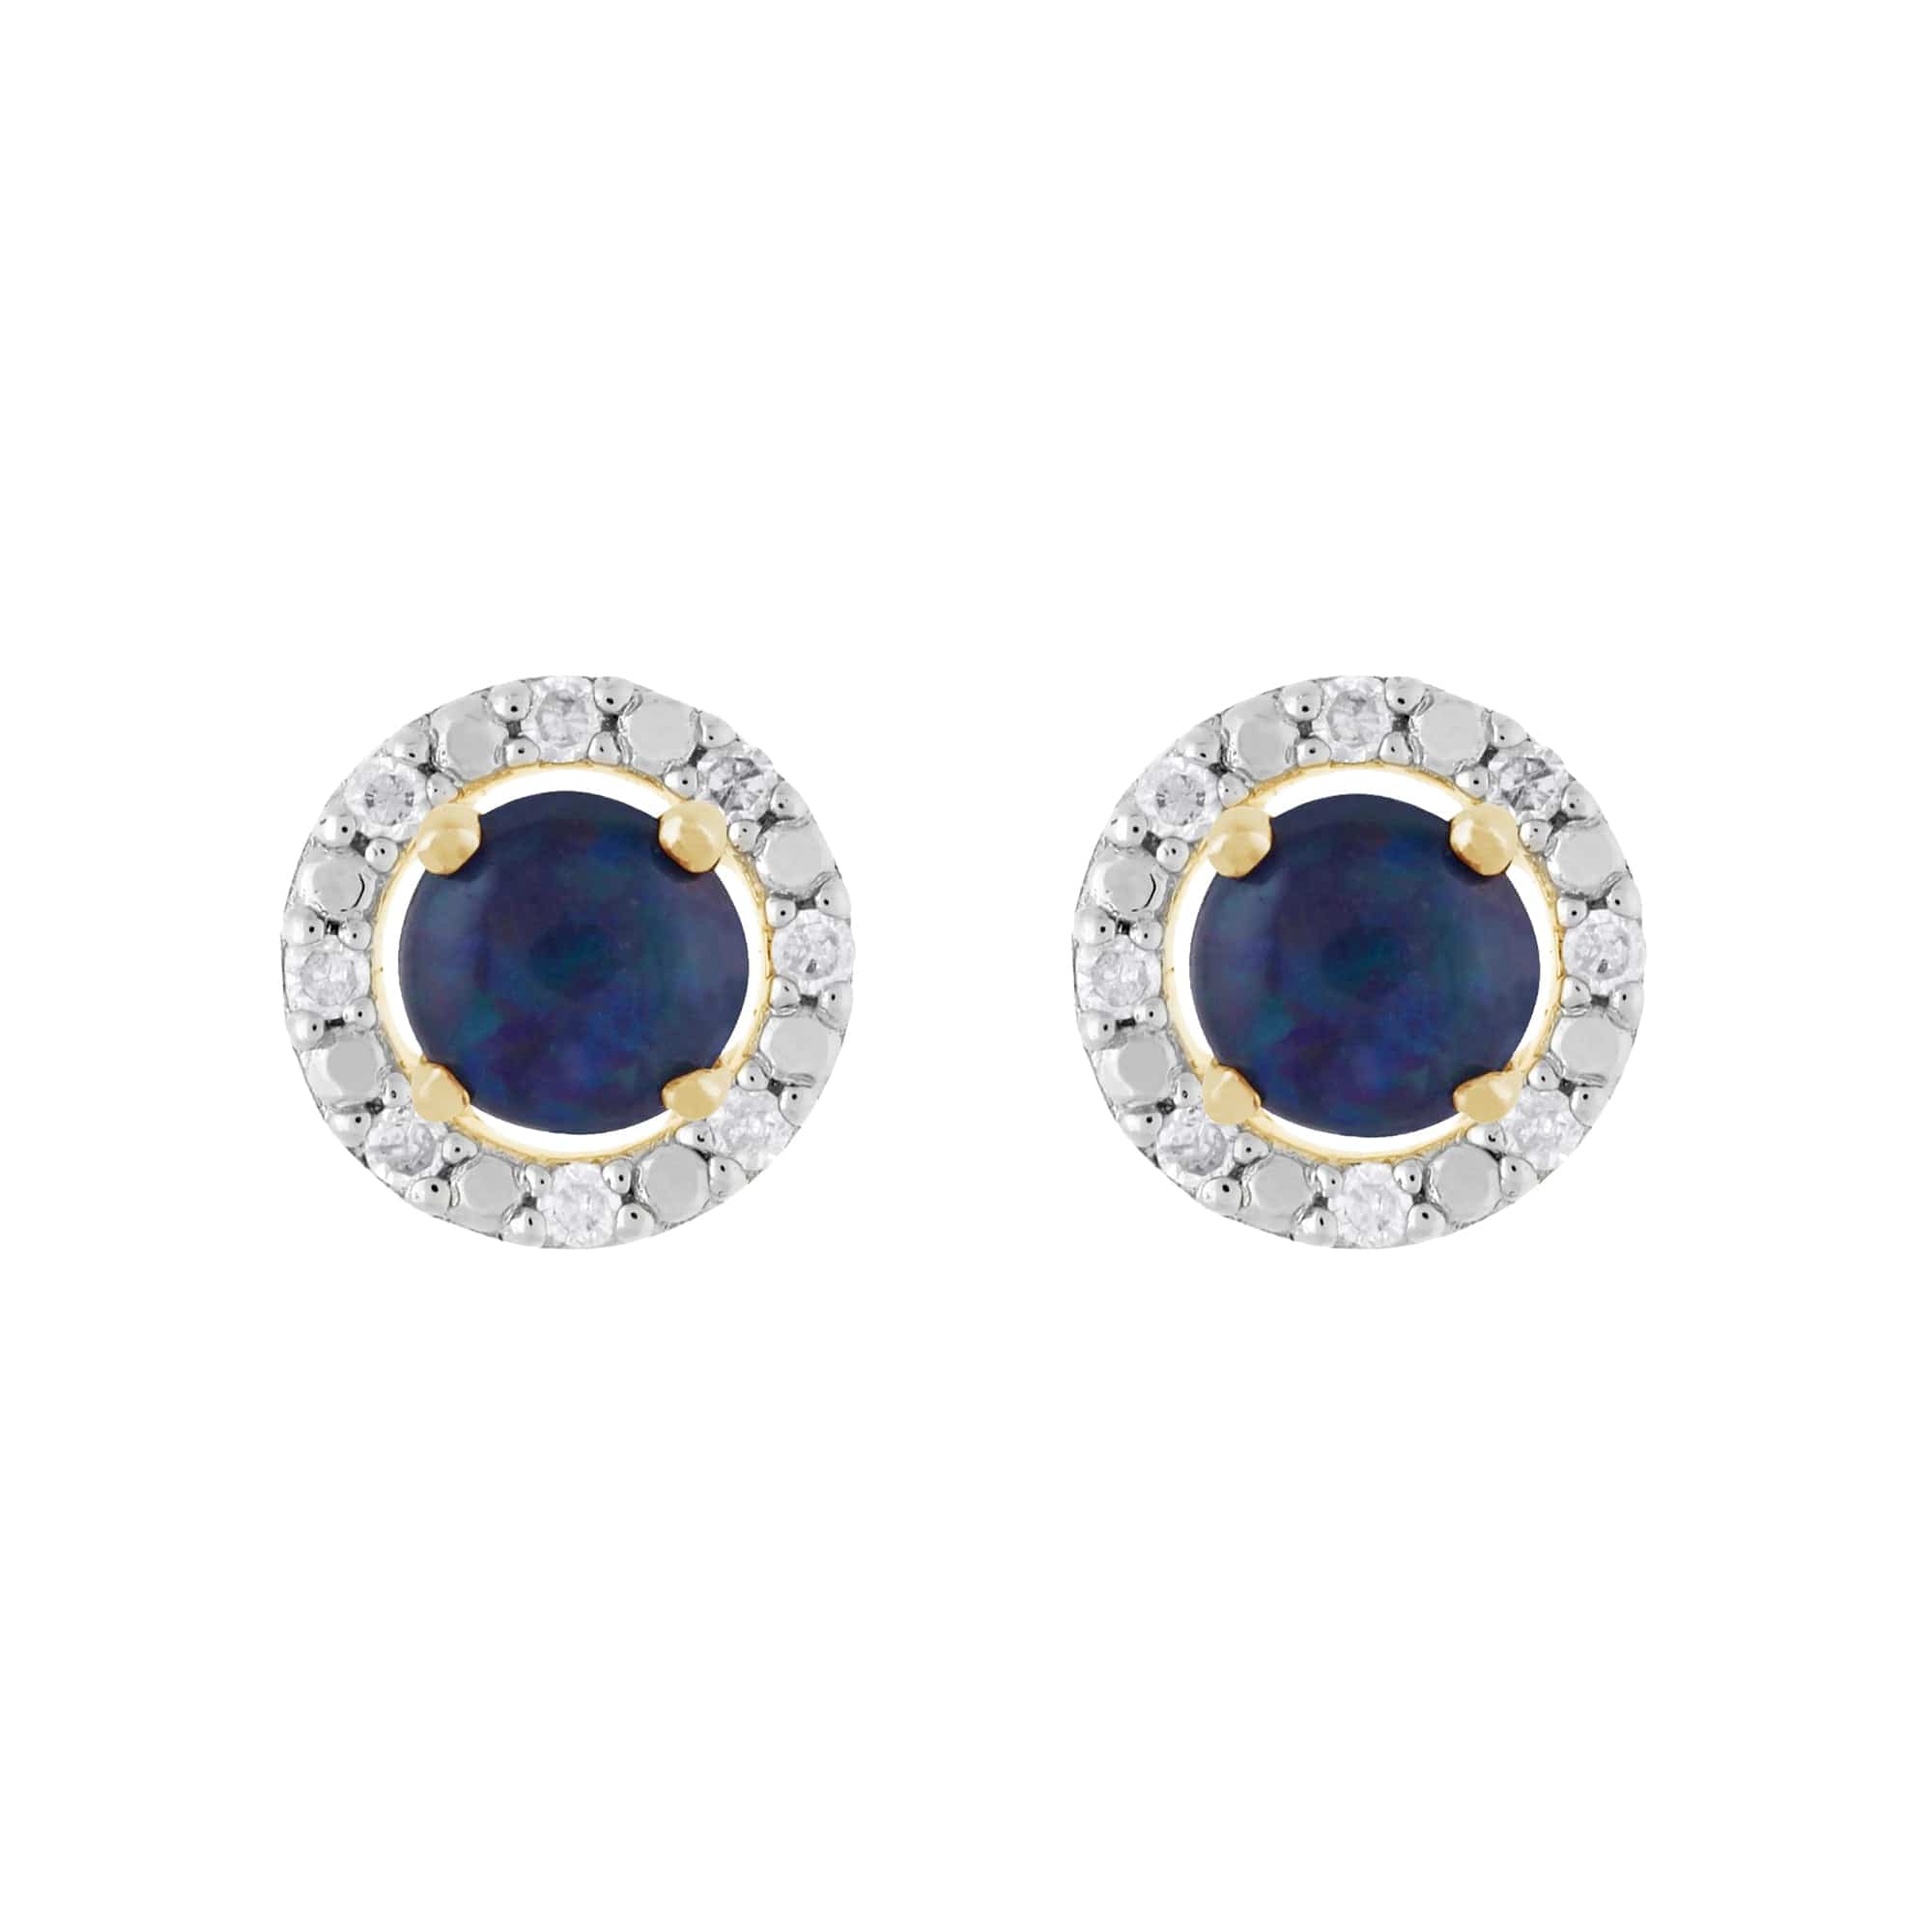 183E0083379-191E0376019 Classic Round Triplet Opal Stud Earrings with Detachable Diamond Round Earrings Jacket Set in 9ct Yellow Gold 1